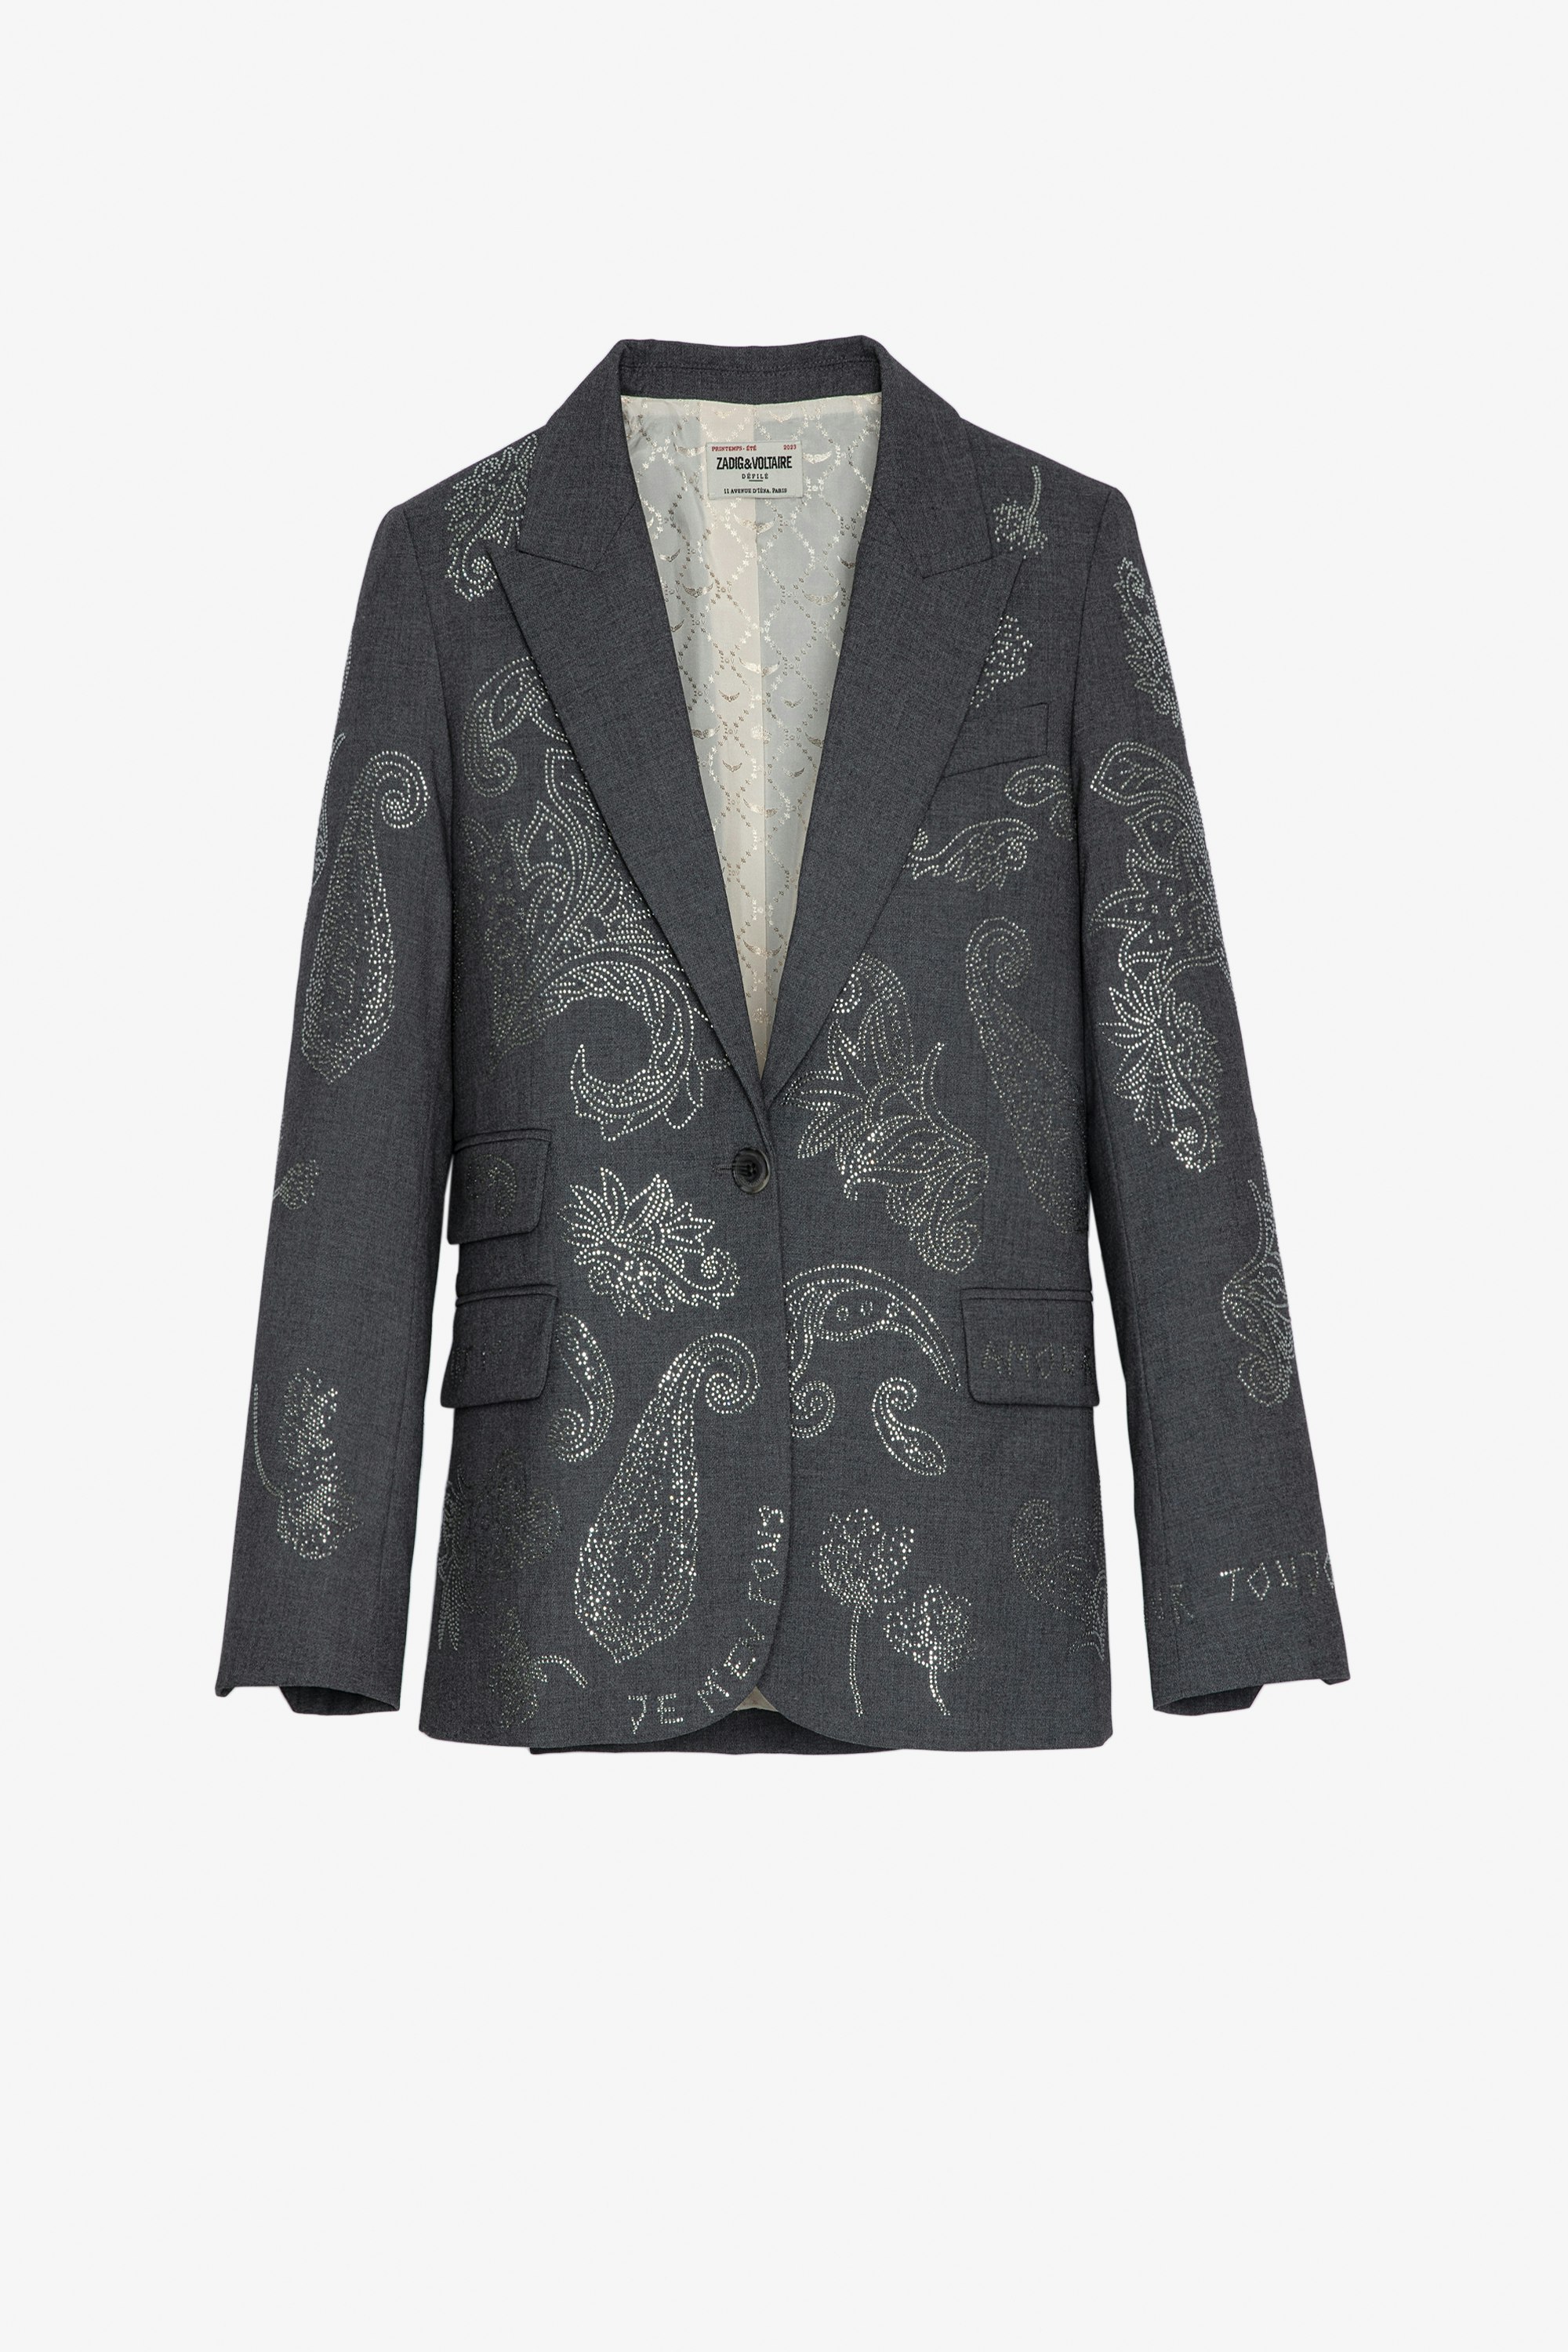 Venus Blazer Women’s grey tailored jacket with paisley pattern decorated with crystals